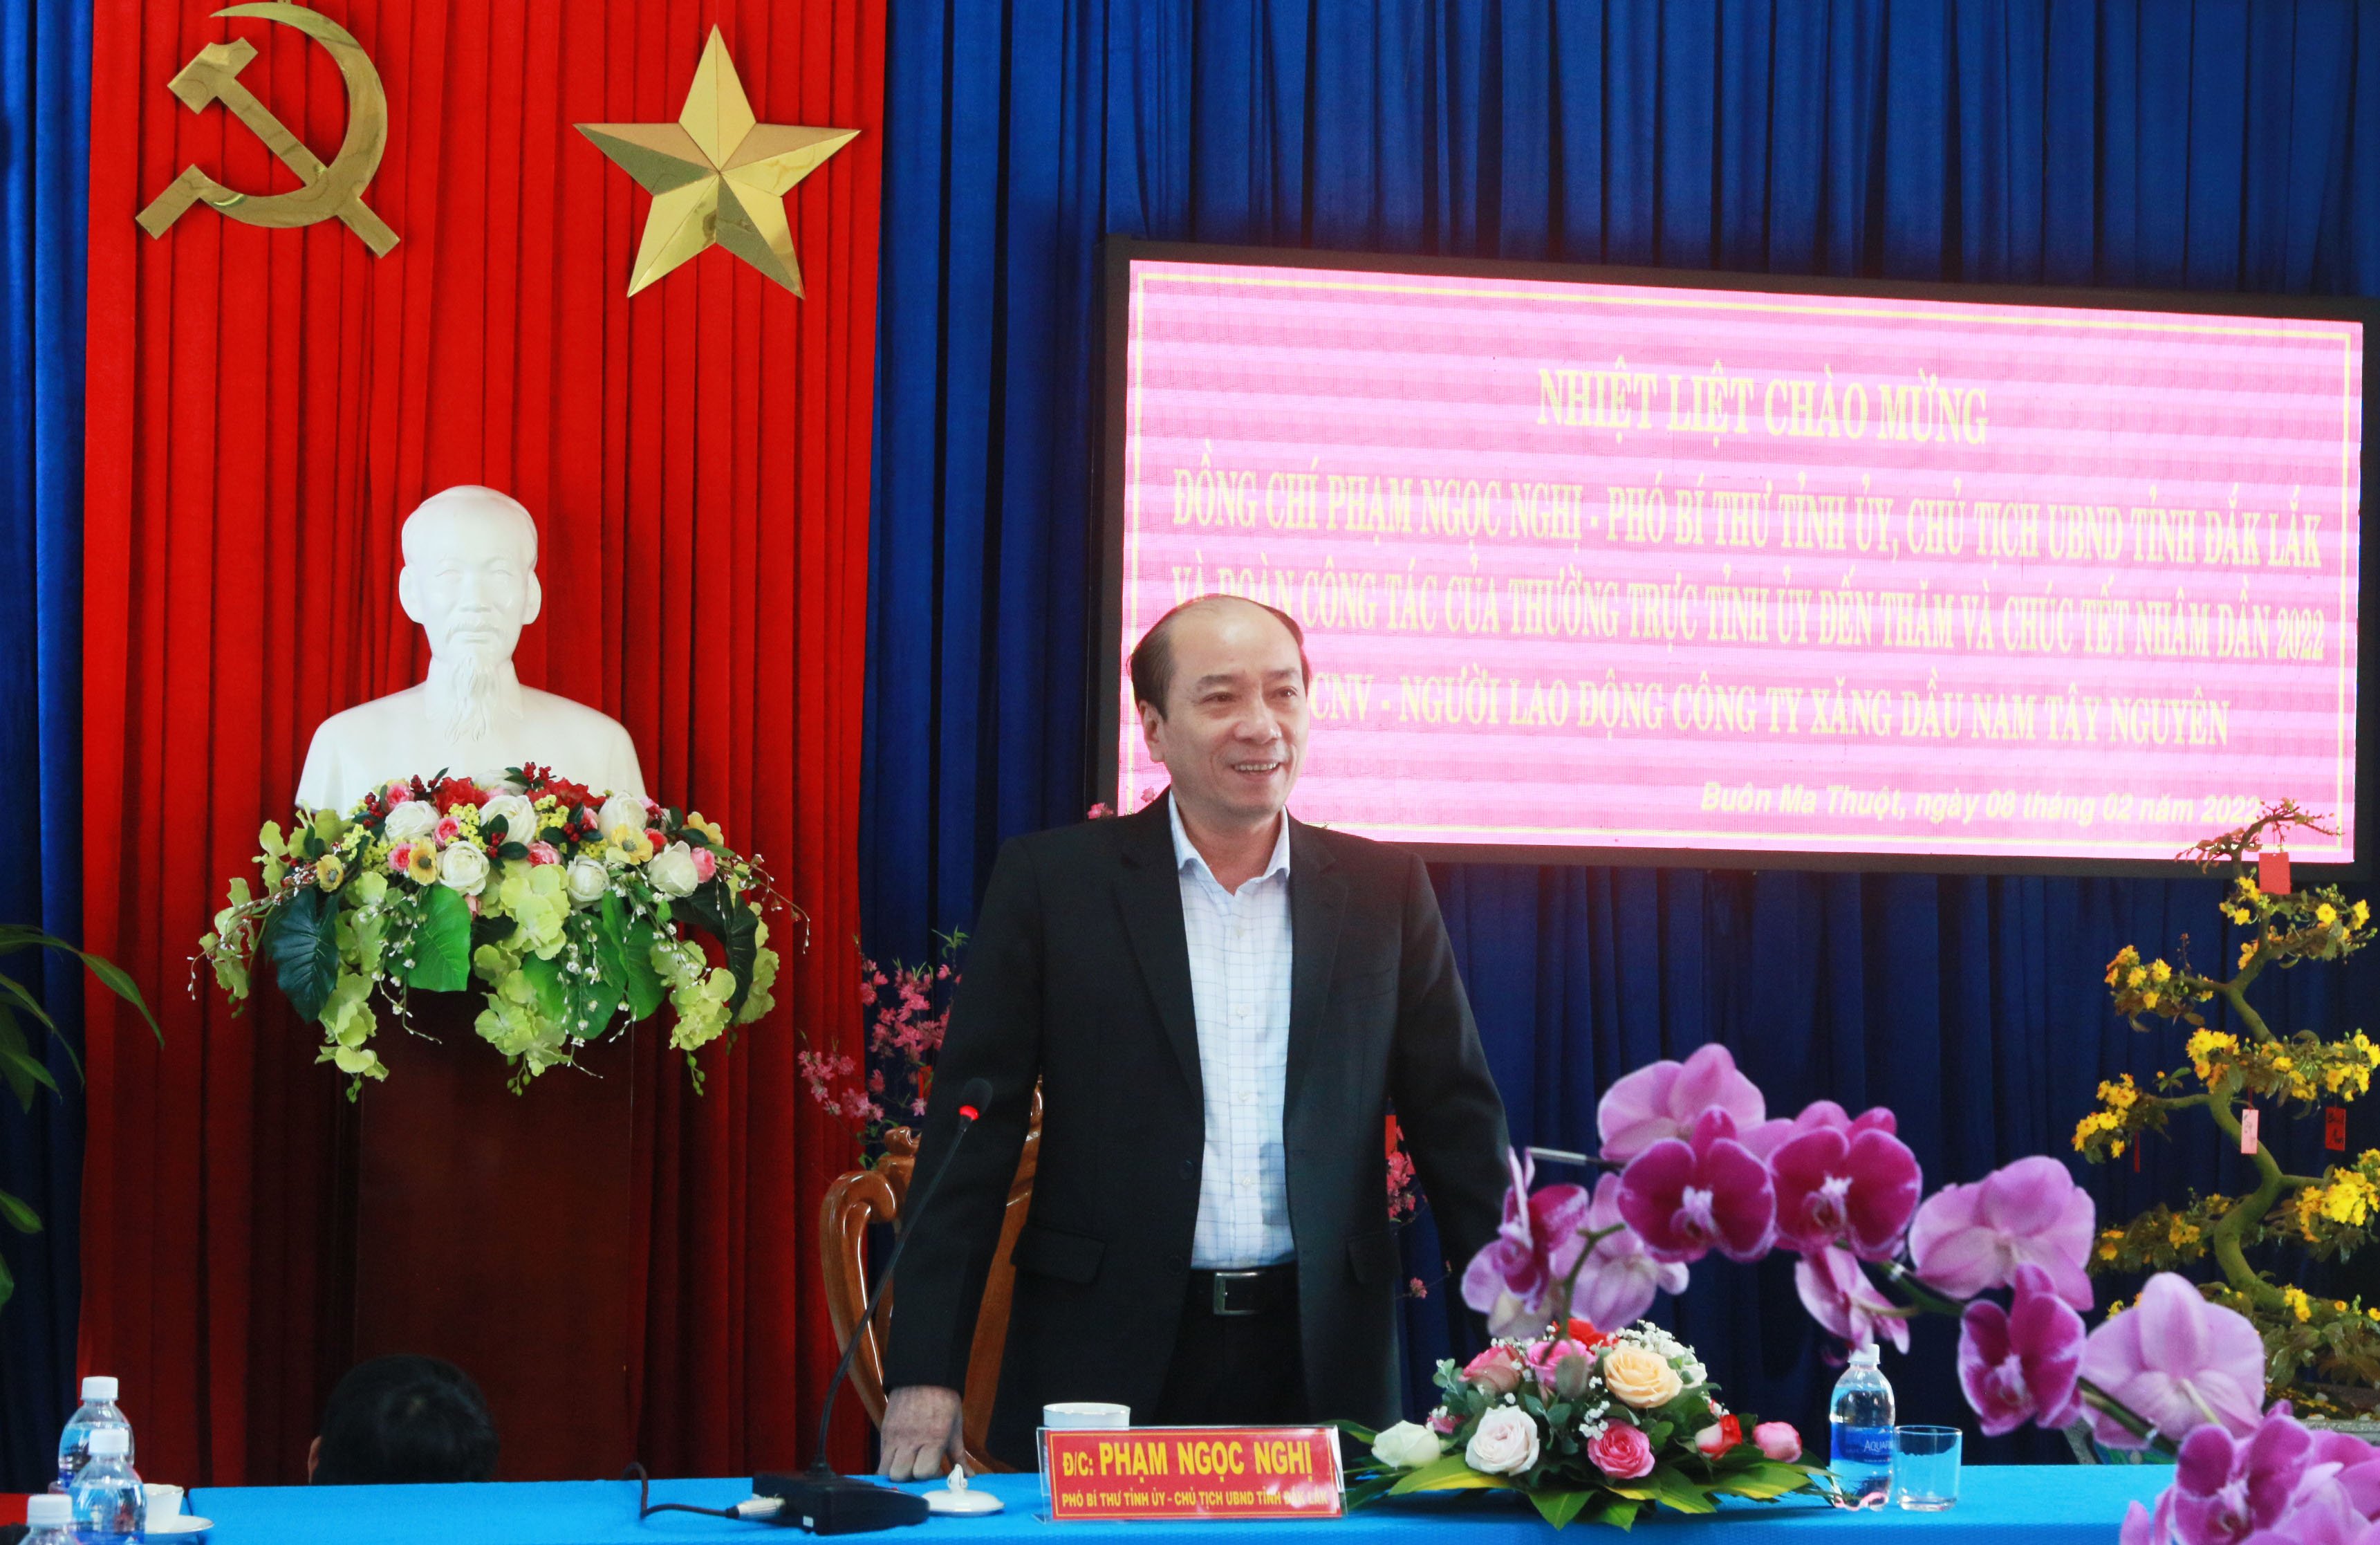 Chairman of the People's Committee of Dak Lak Province Pham Ngoc Nghi visits the South Central Highlands Petroleum Company on the occasion of Lunar New Year 2022